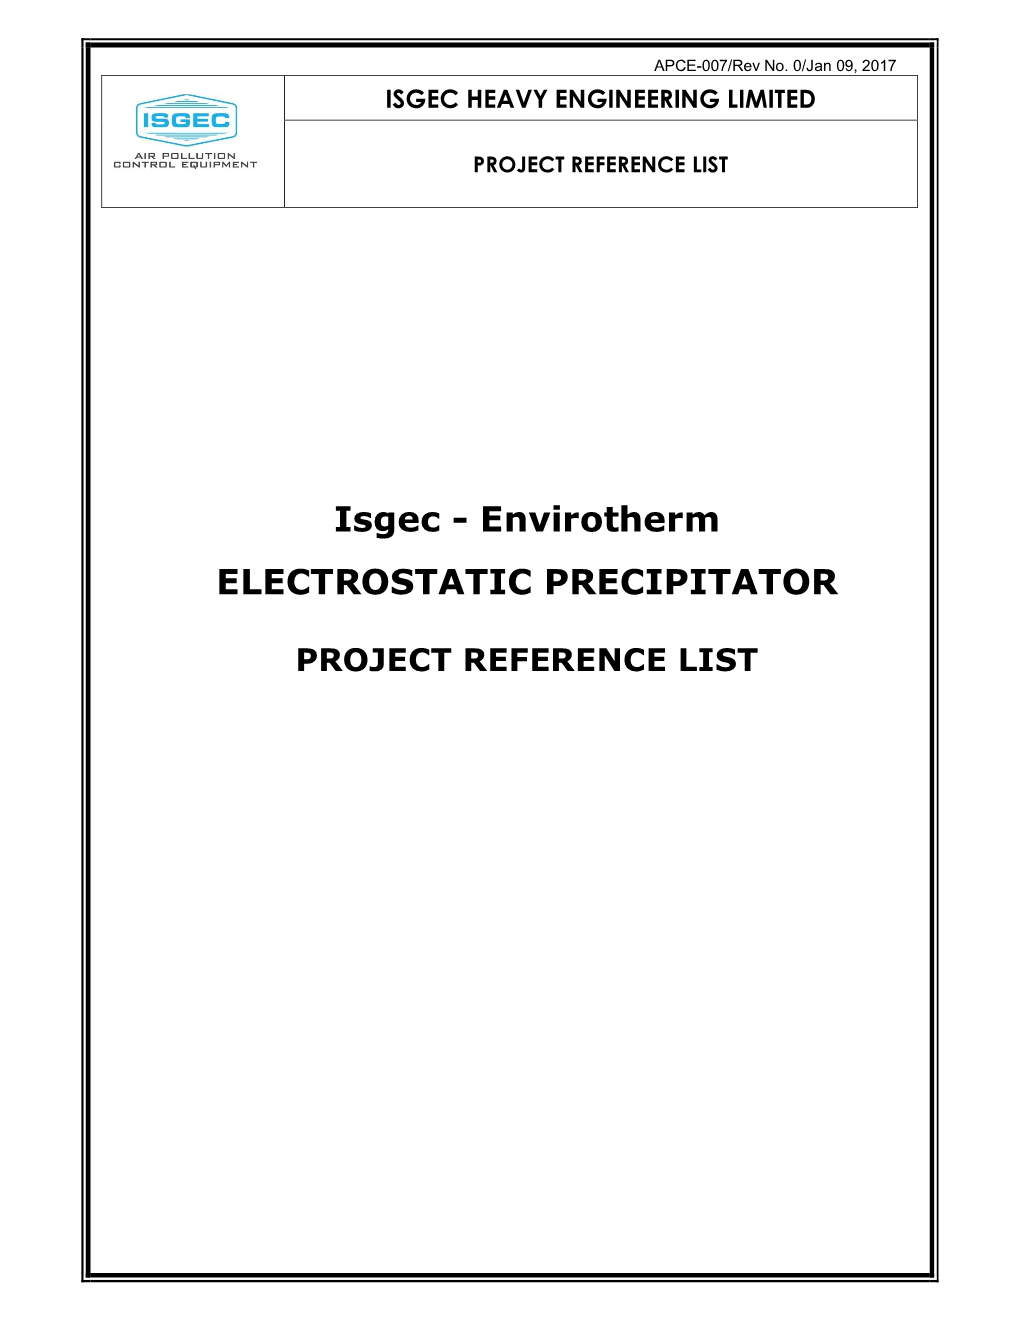 Project Reference List